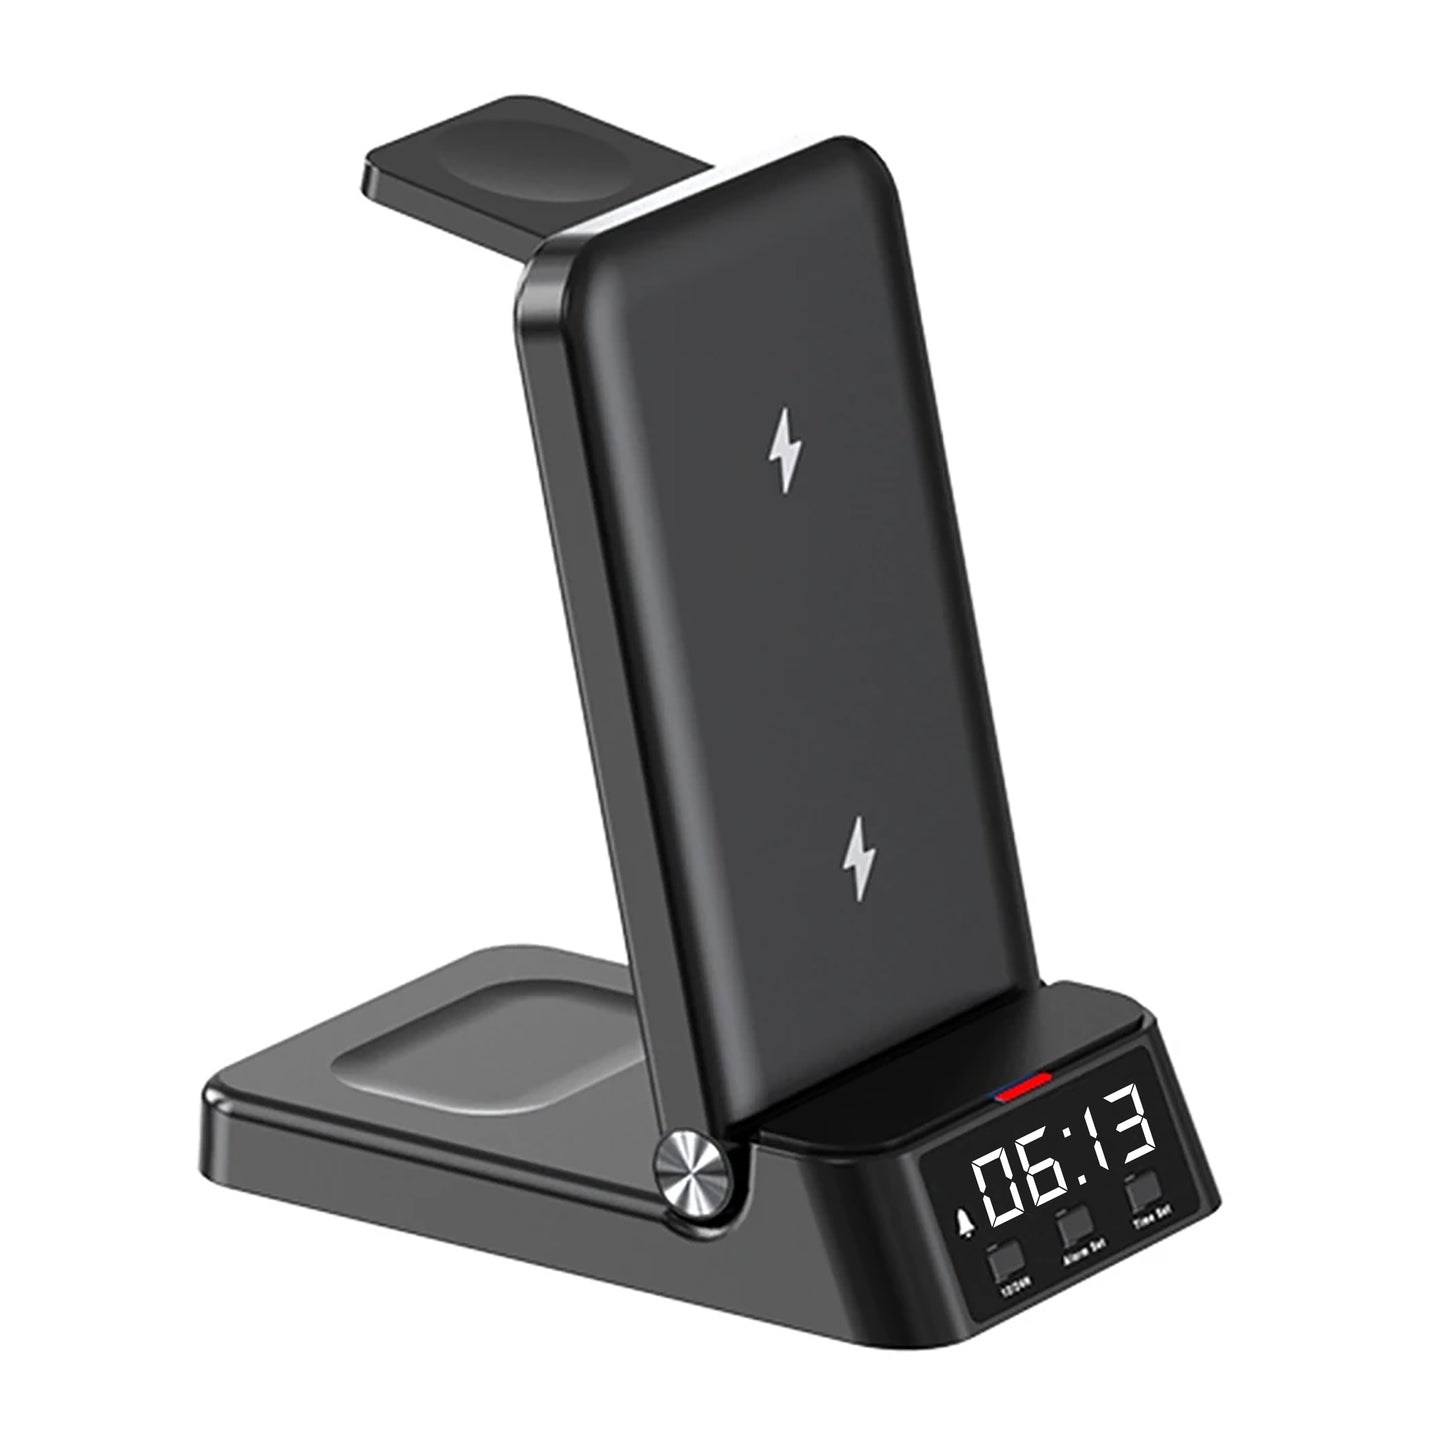 Waloo Mini Wireless Charging Dock With Alarm Clock For iPhone, Apple Watch & AirPods